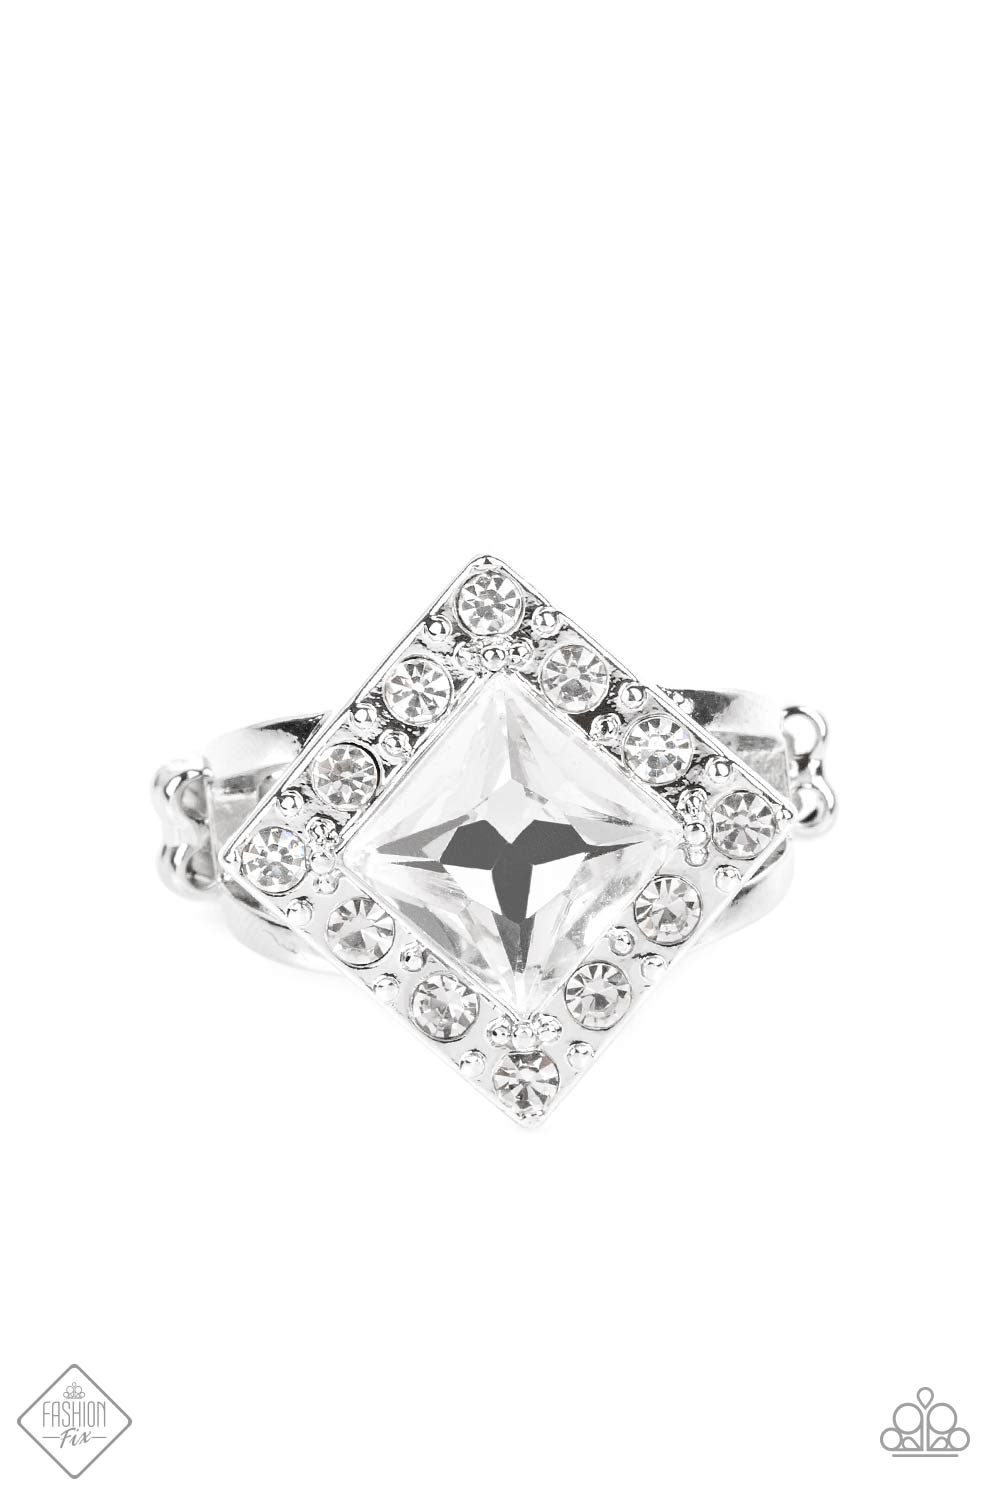 Transformational Twinkle - White and Silver Fashion Ring - Paparazzi Accessories - An oversized, square-cut, white rhinestone is tilted on a point and framed by tiny white gems. As it sits atop a pair of sleek silver bands, the faceted surface of the centerpiece catches and reflects the light of the accents that surround it, magnifying its impressive impact. Features a dainty stretchy band for an adjustable flexible fit.